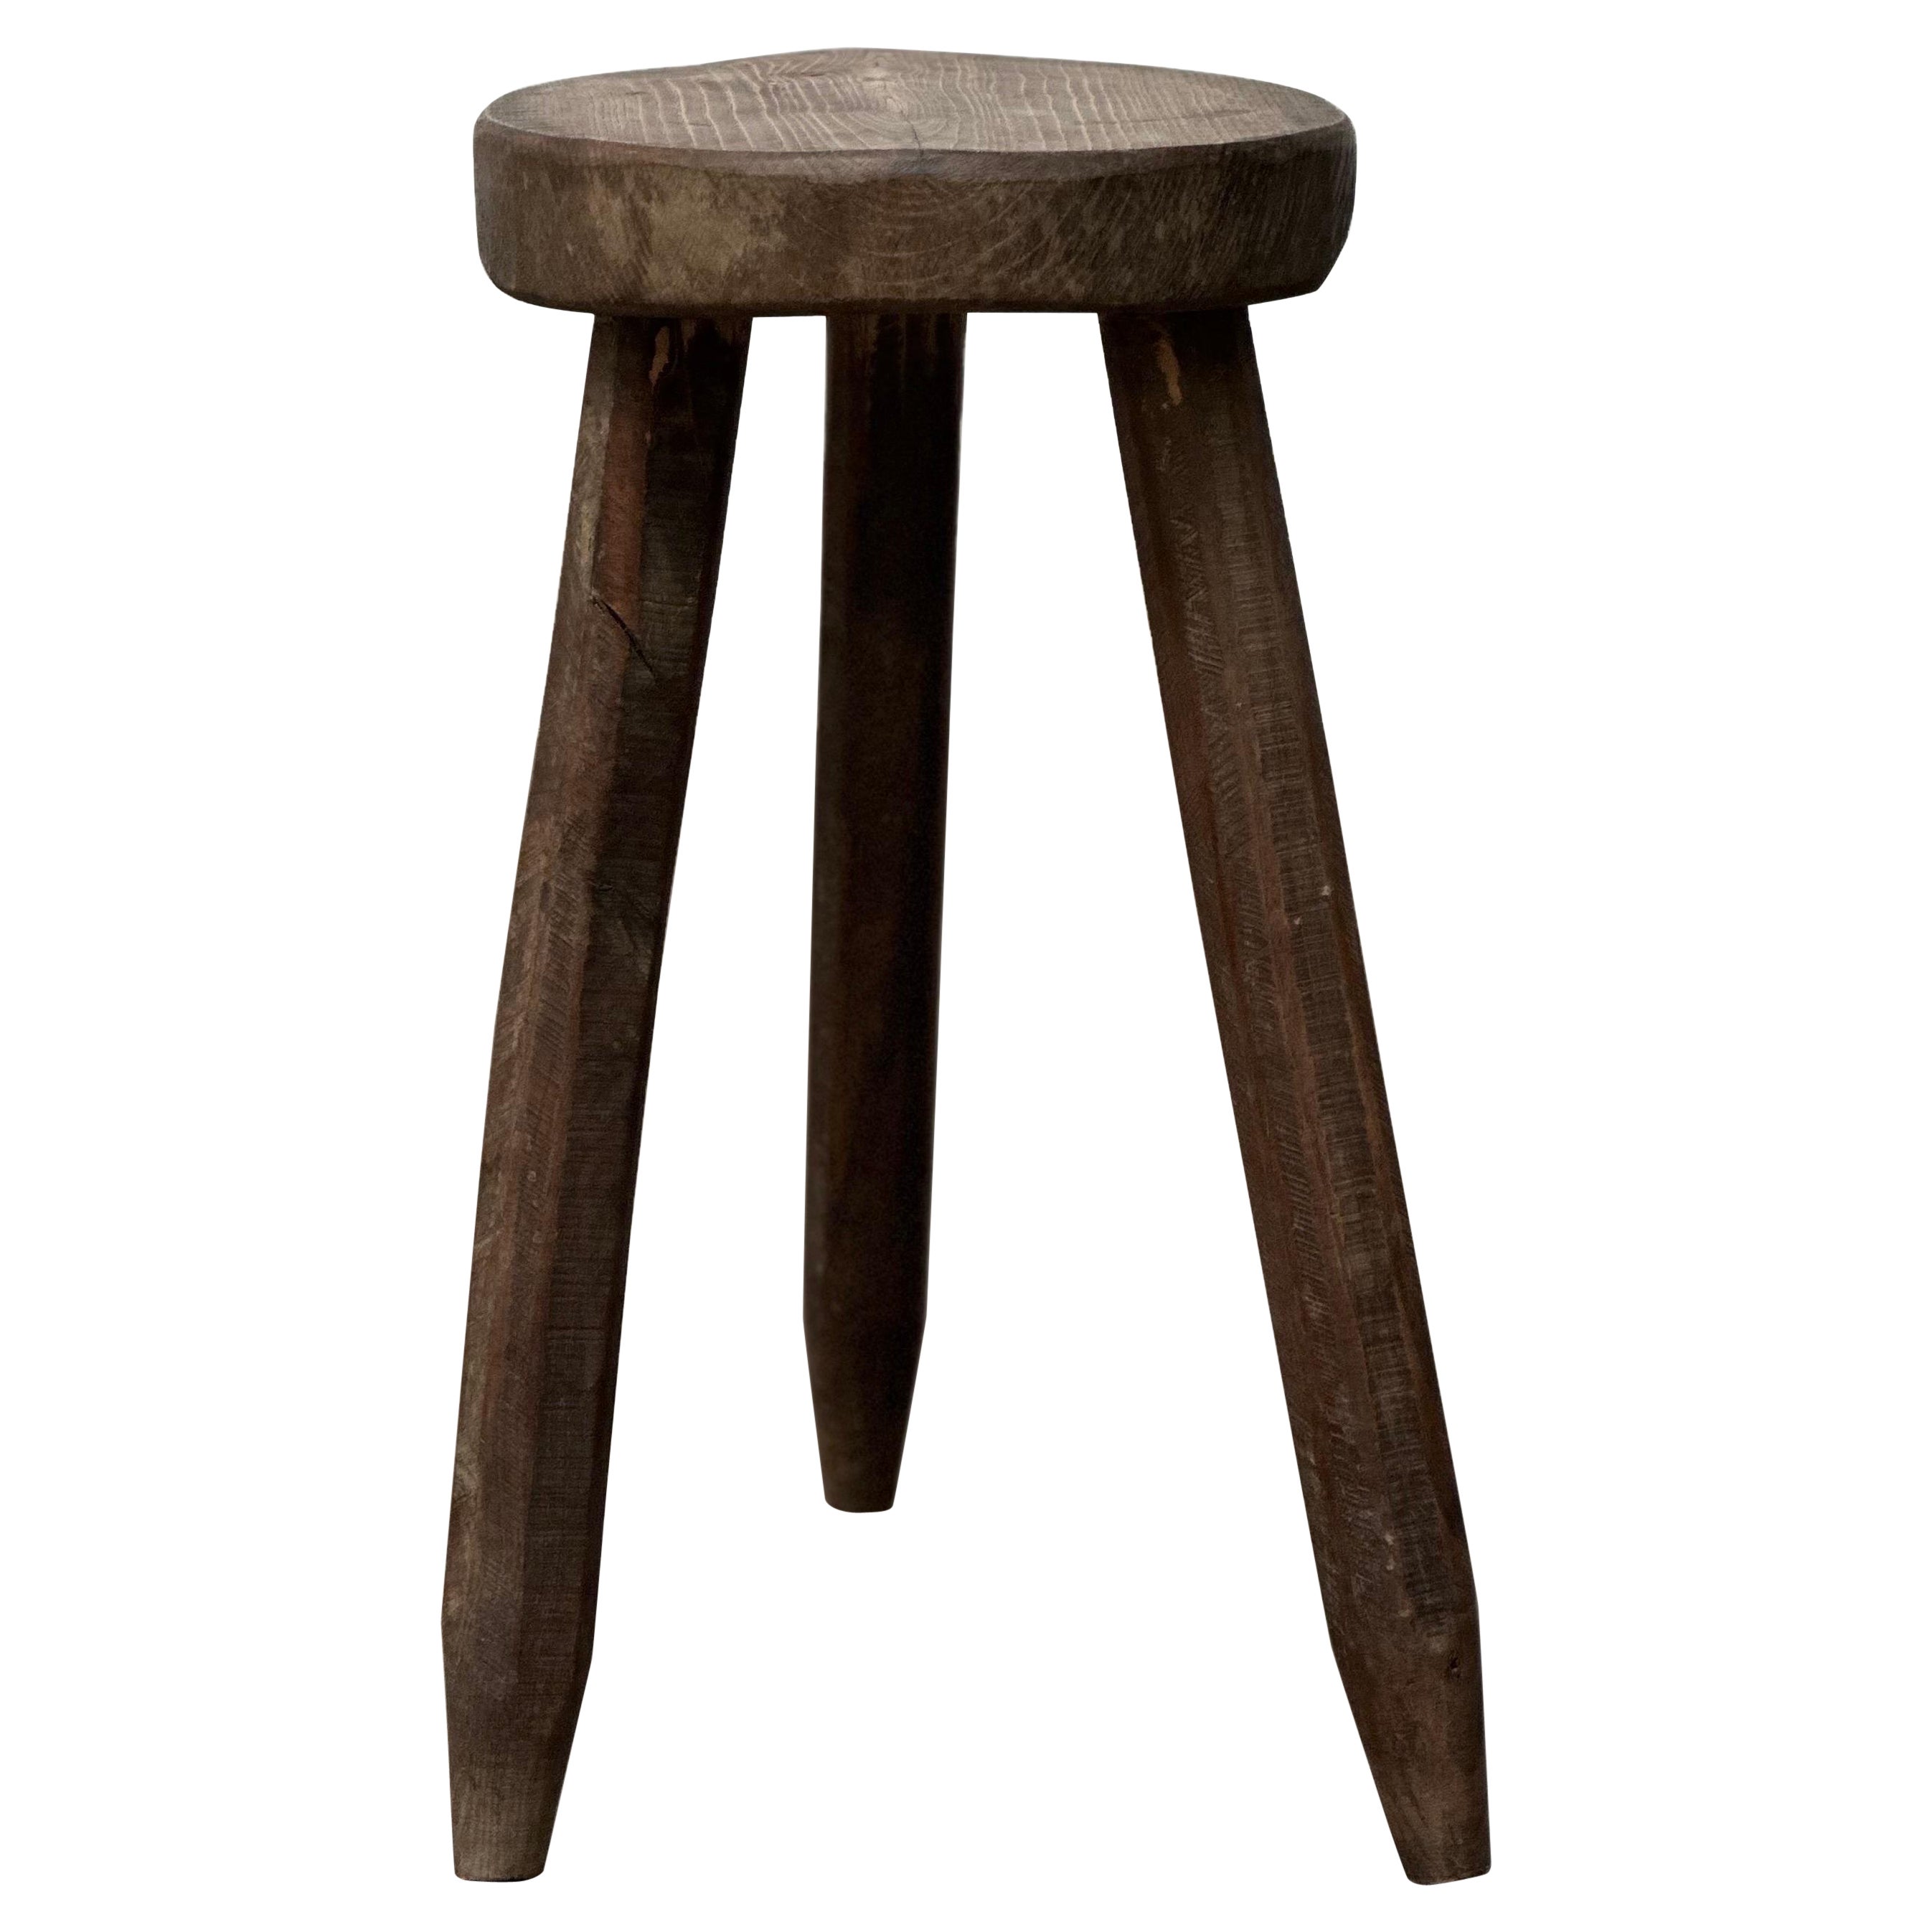 French Brutalist Tripod Stool, 1960s - Embrace the Charm of Primitive Elegance For Sale